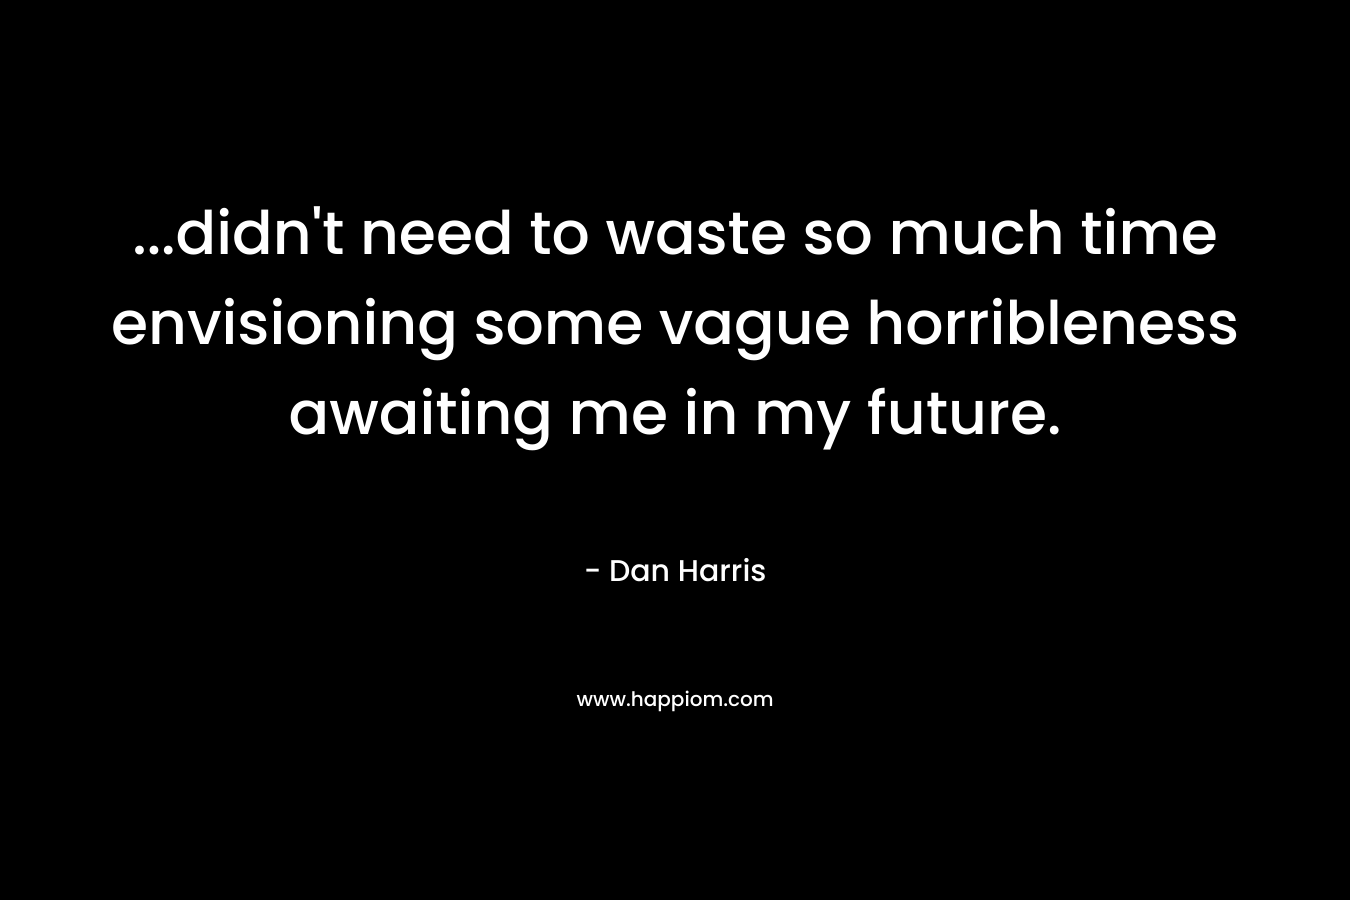 …didn’t need to waste so much time envisioning some vague horribleness awaiting me in my future. – Dan Harris